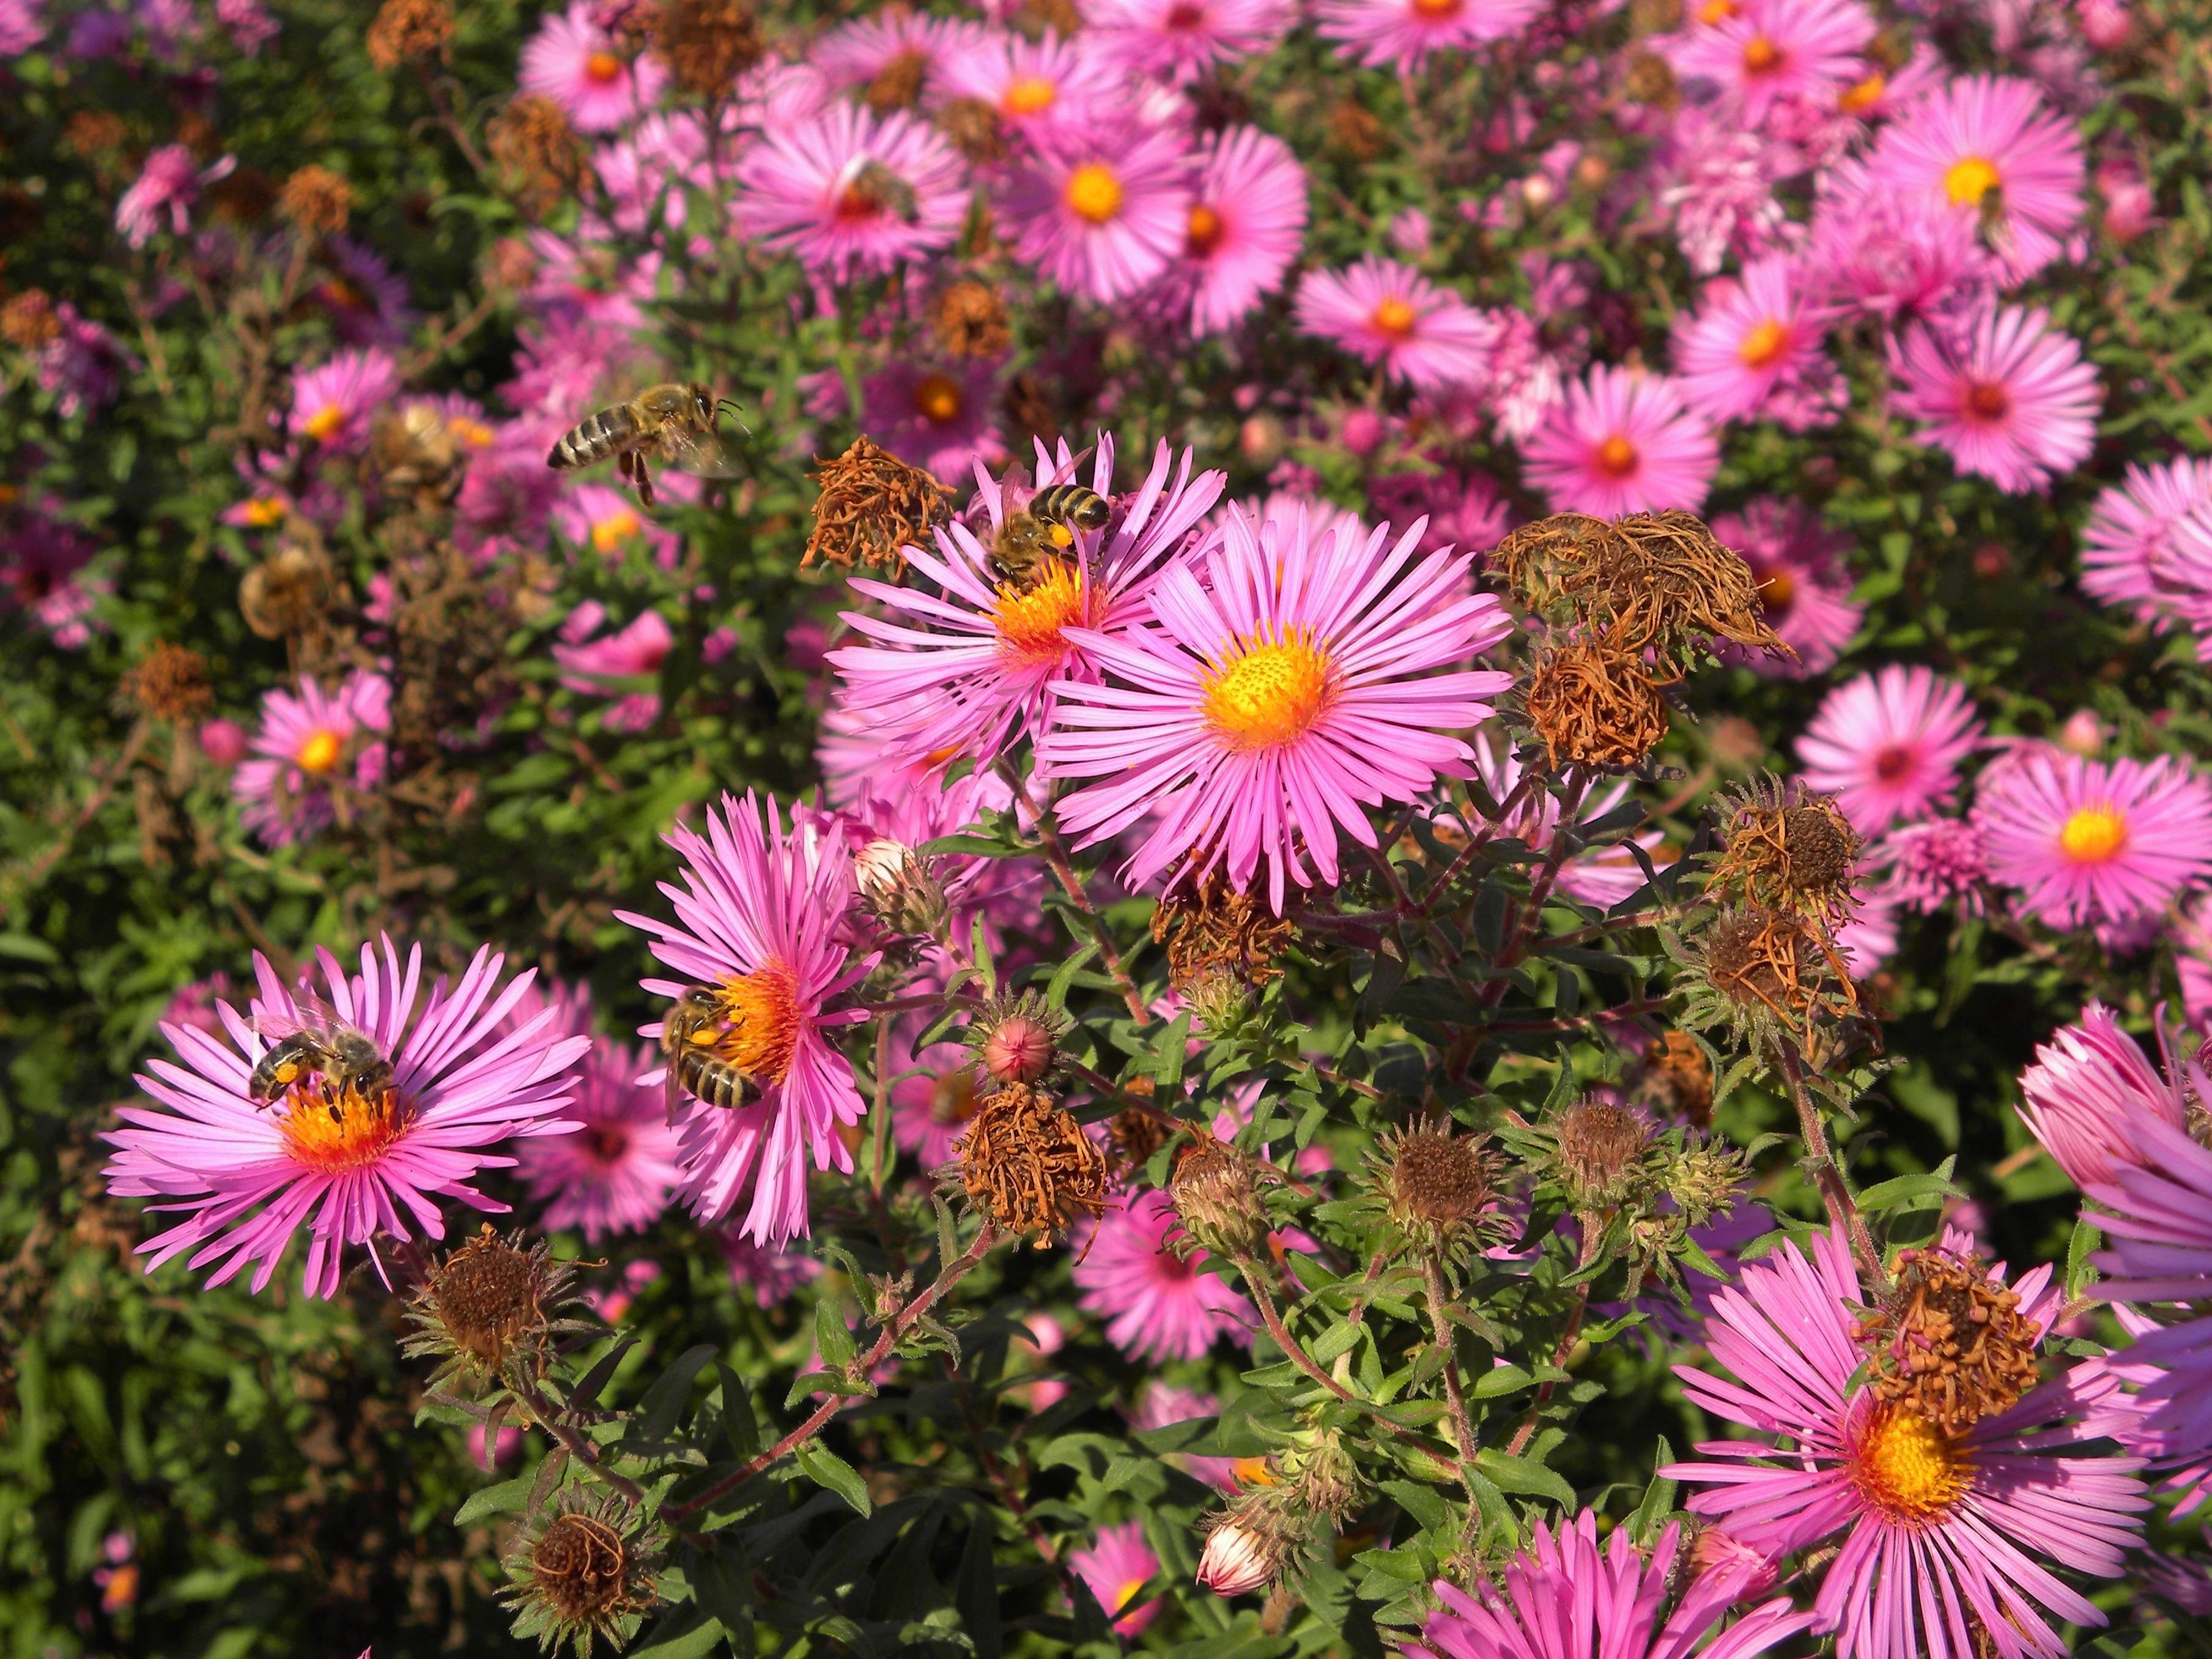 pink flowers with yellow-orange center, pink-brown buds, green leaves and stems